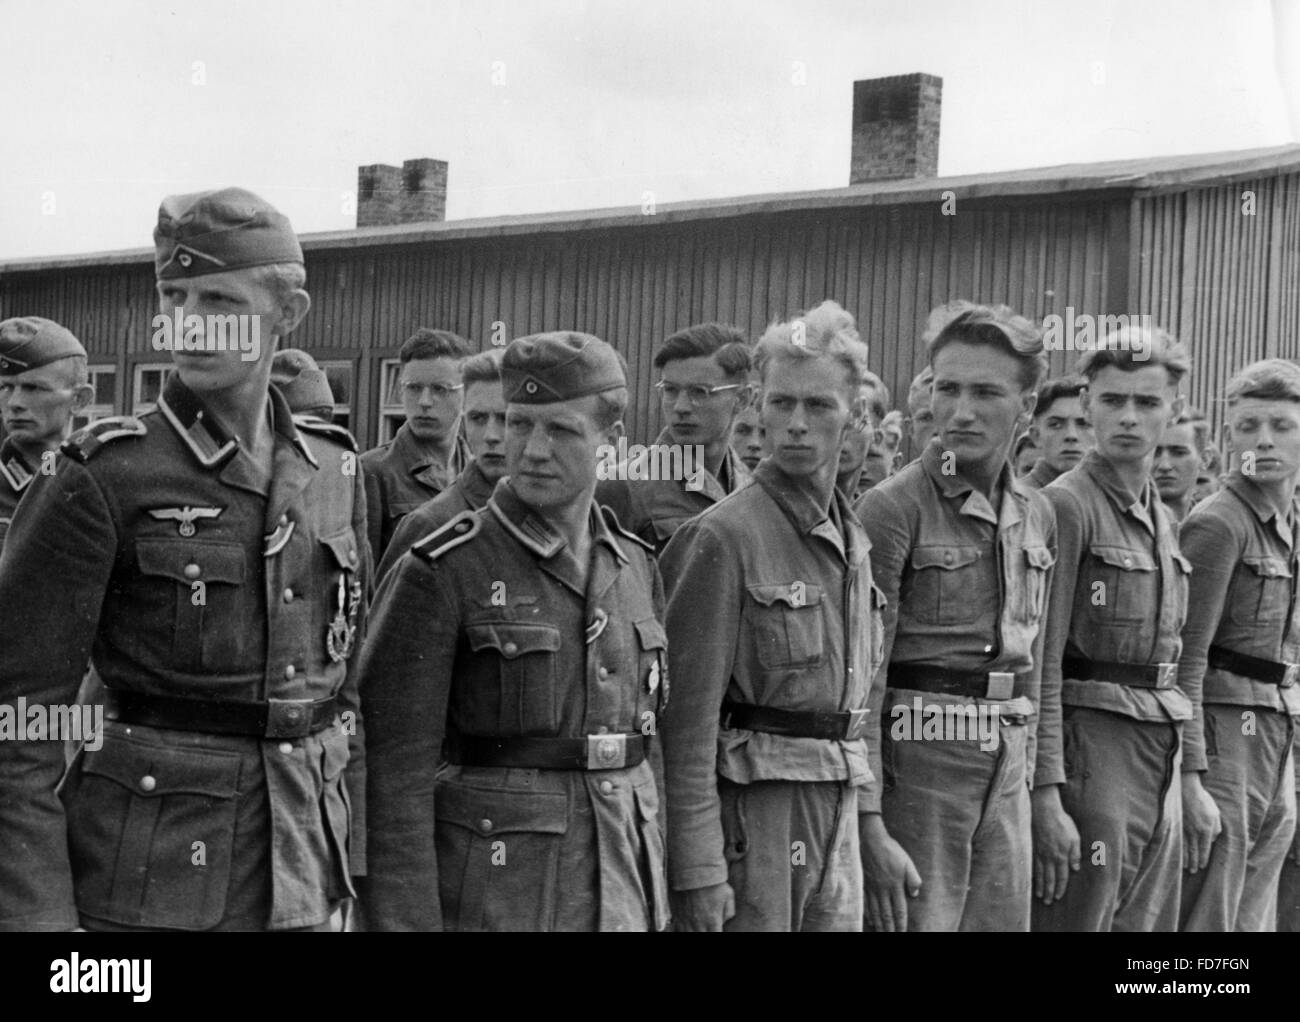 HJ members at roll call, 1942 Stock Photo